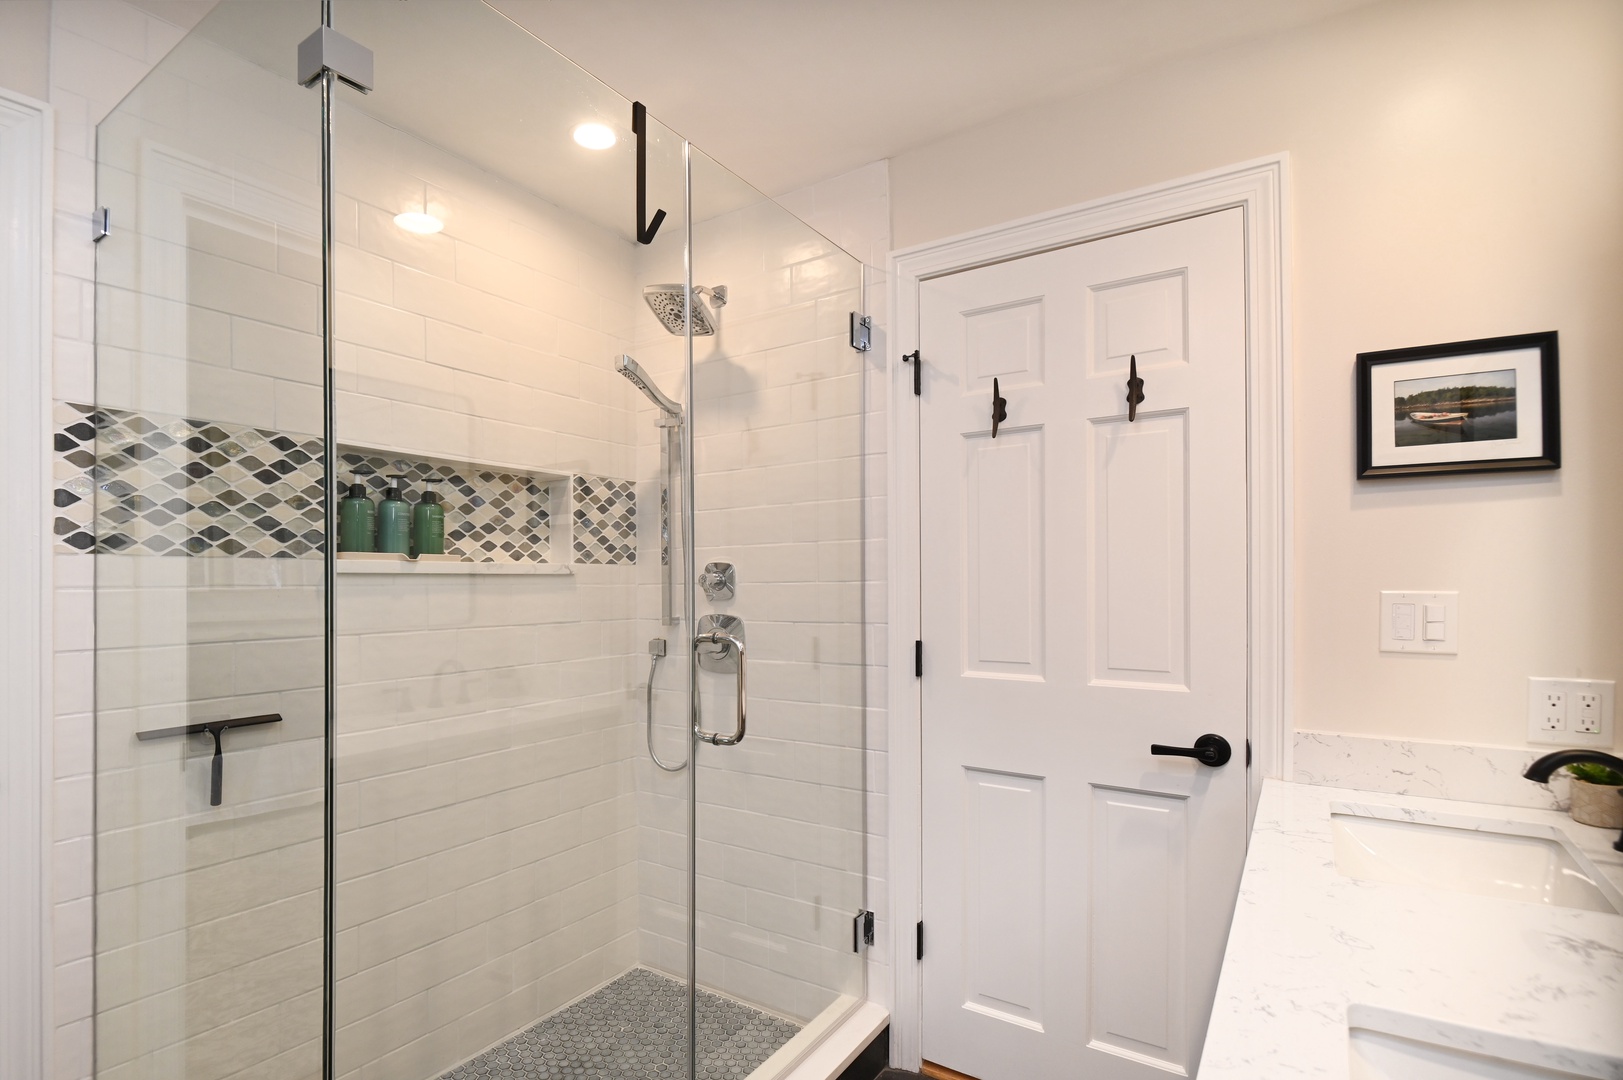 The stylish full bath showcases a double vanity & glass shower